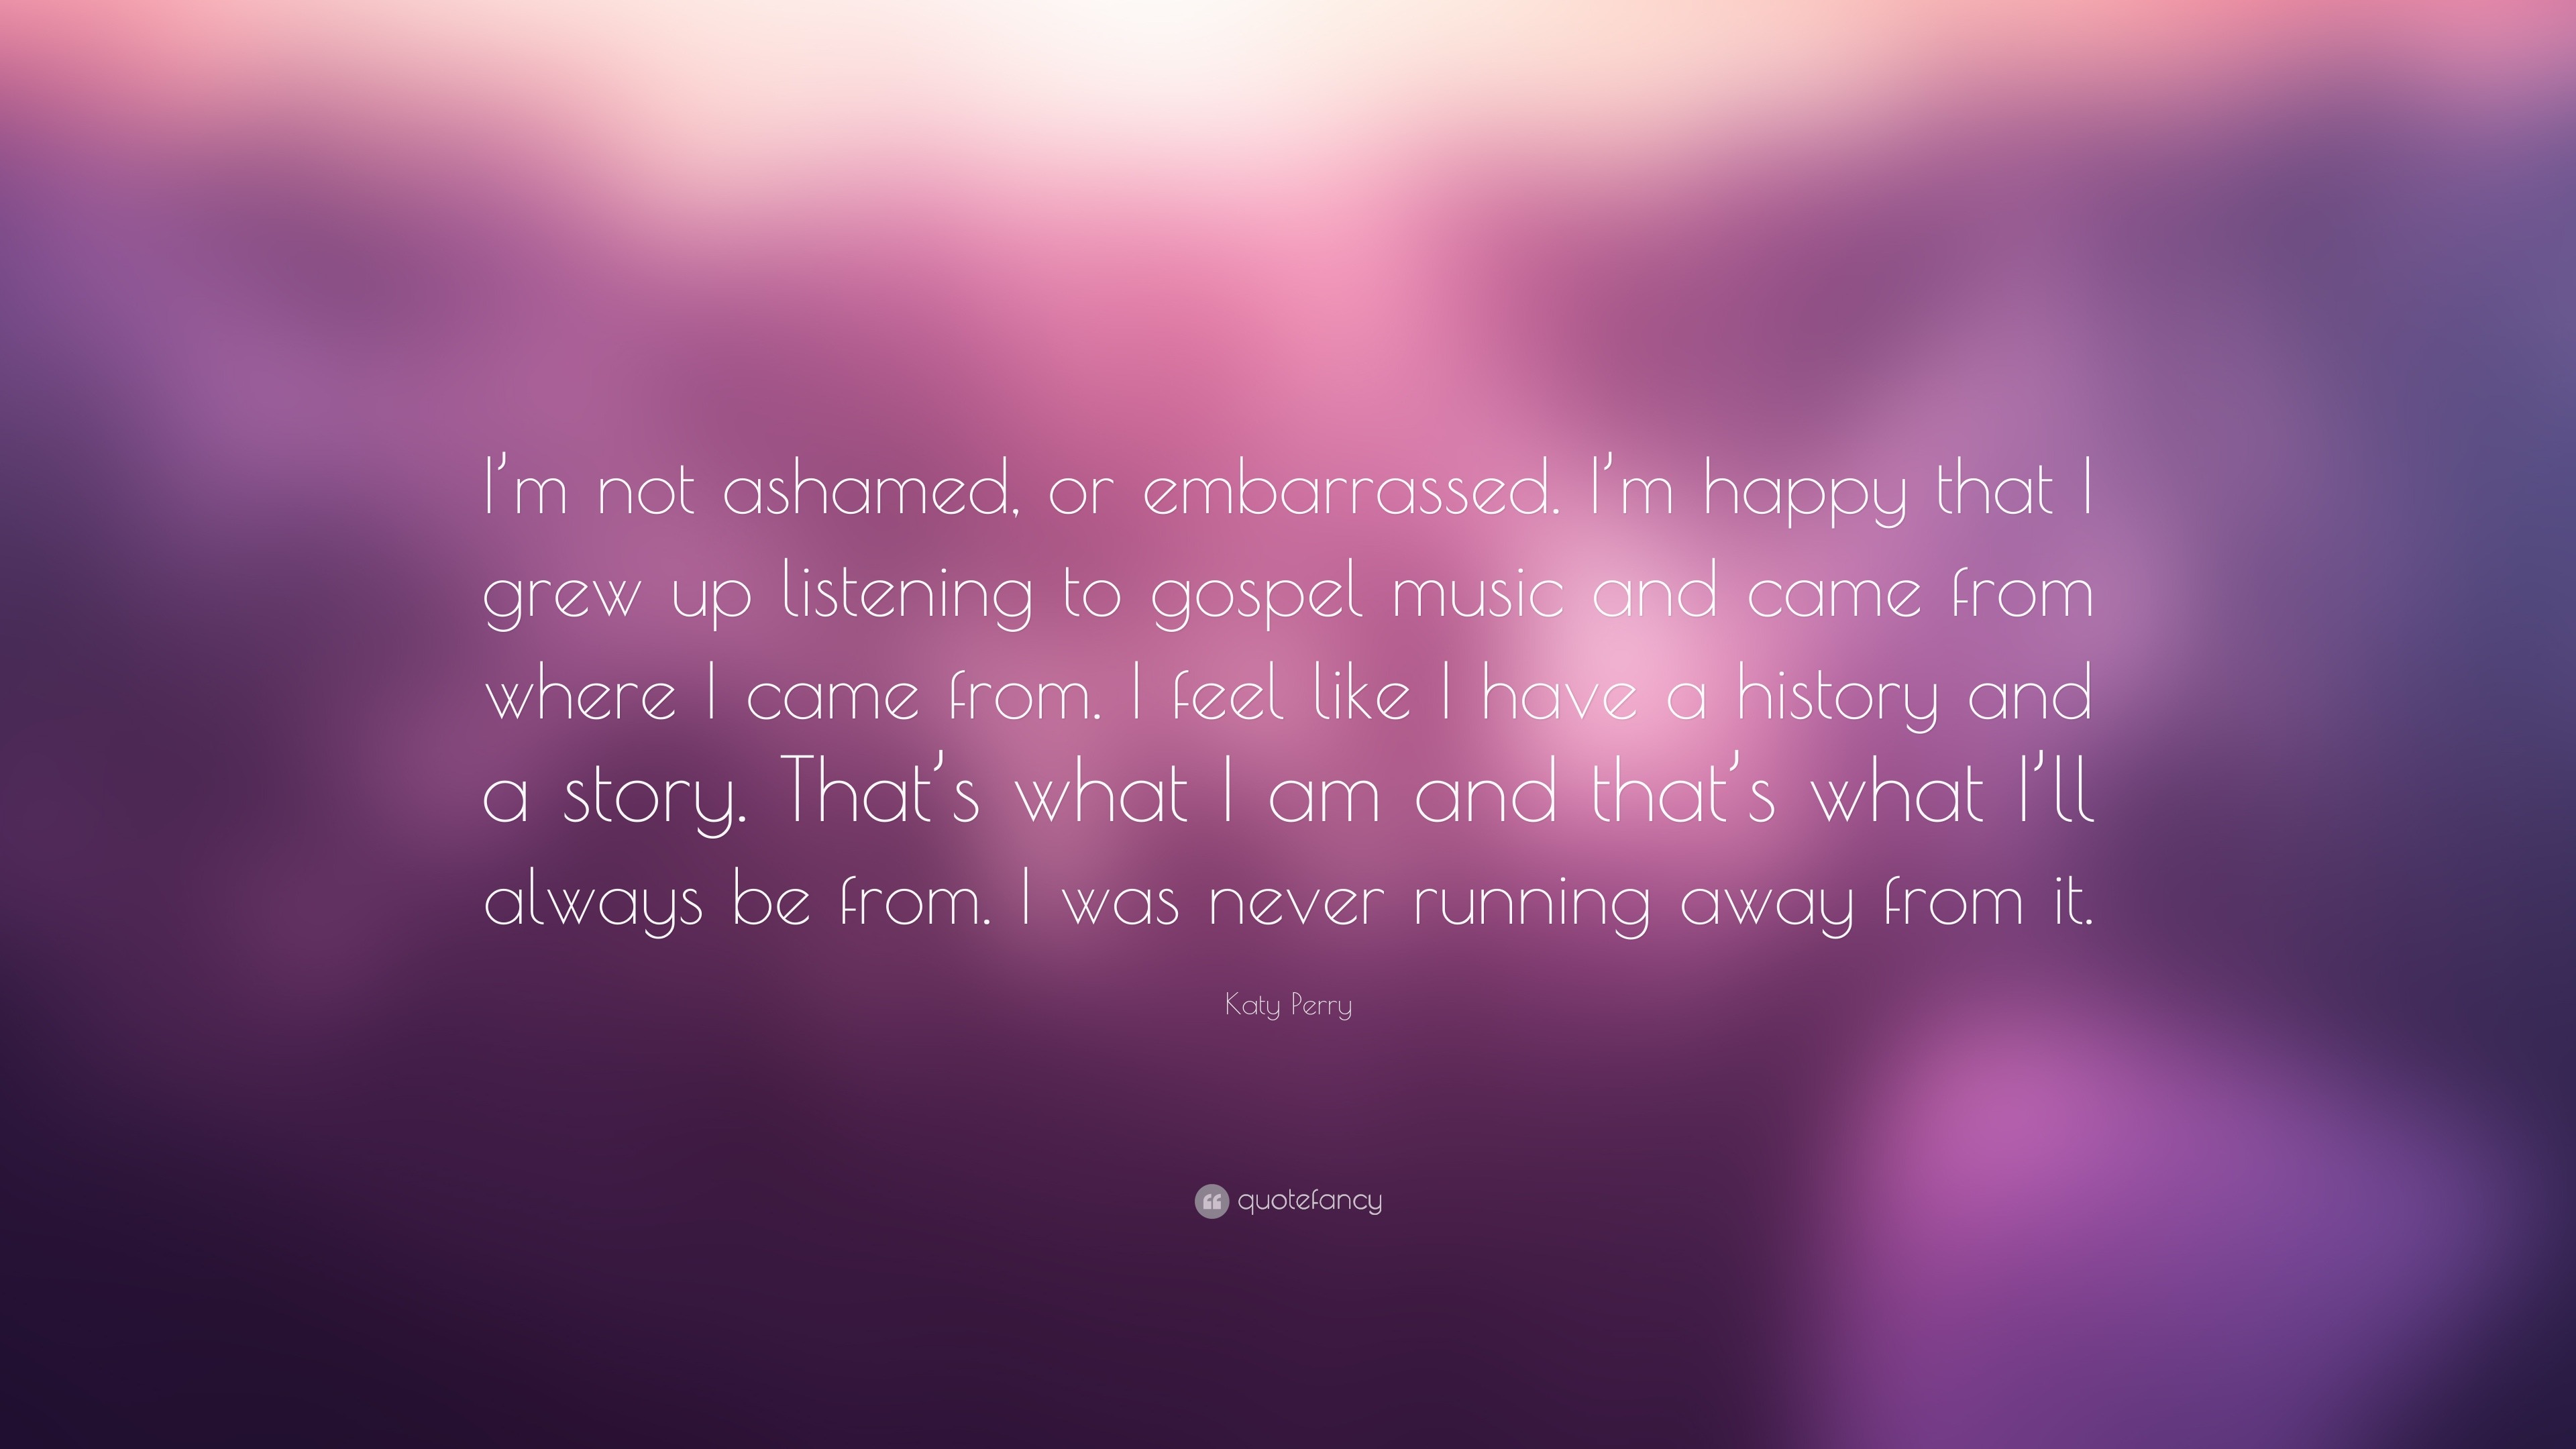 Katy Perry Quote: “I’m not ashamed, or embarrassed. I’m happy that I ...